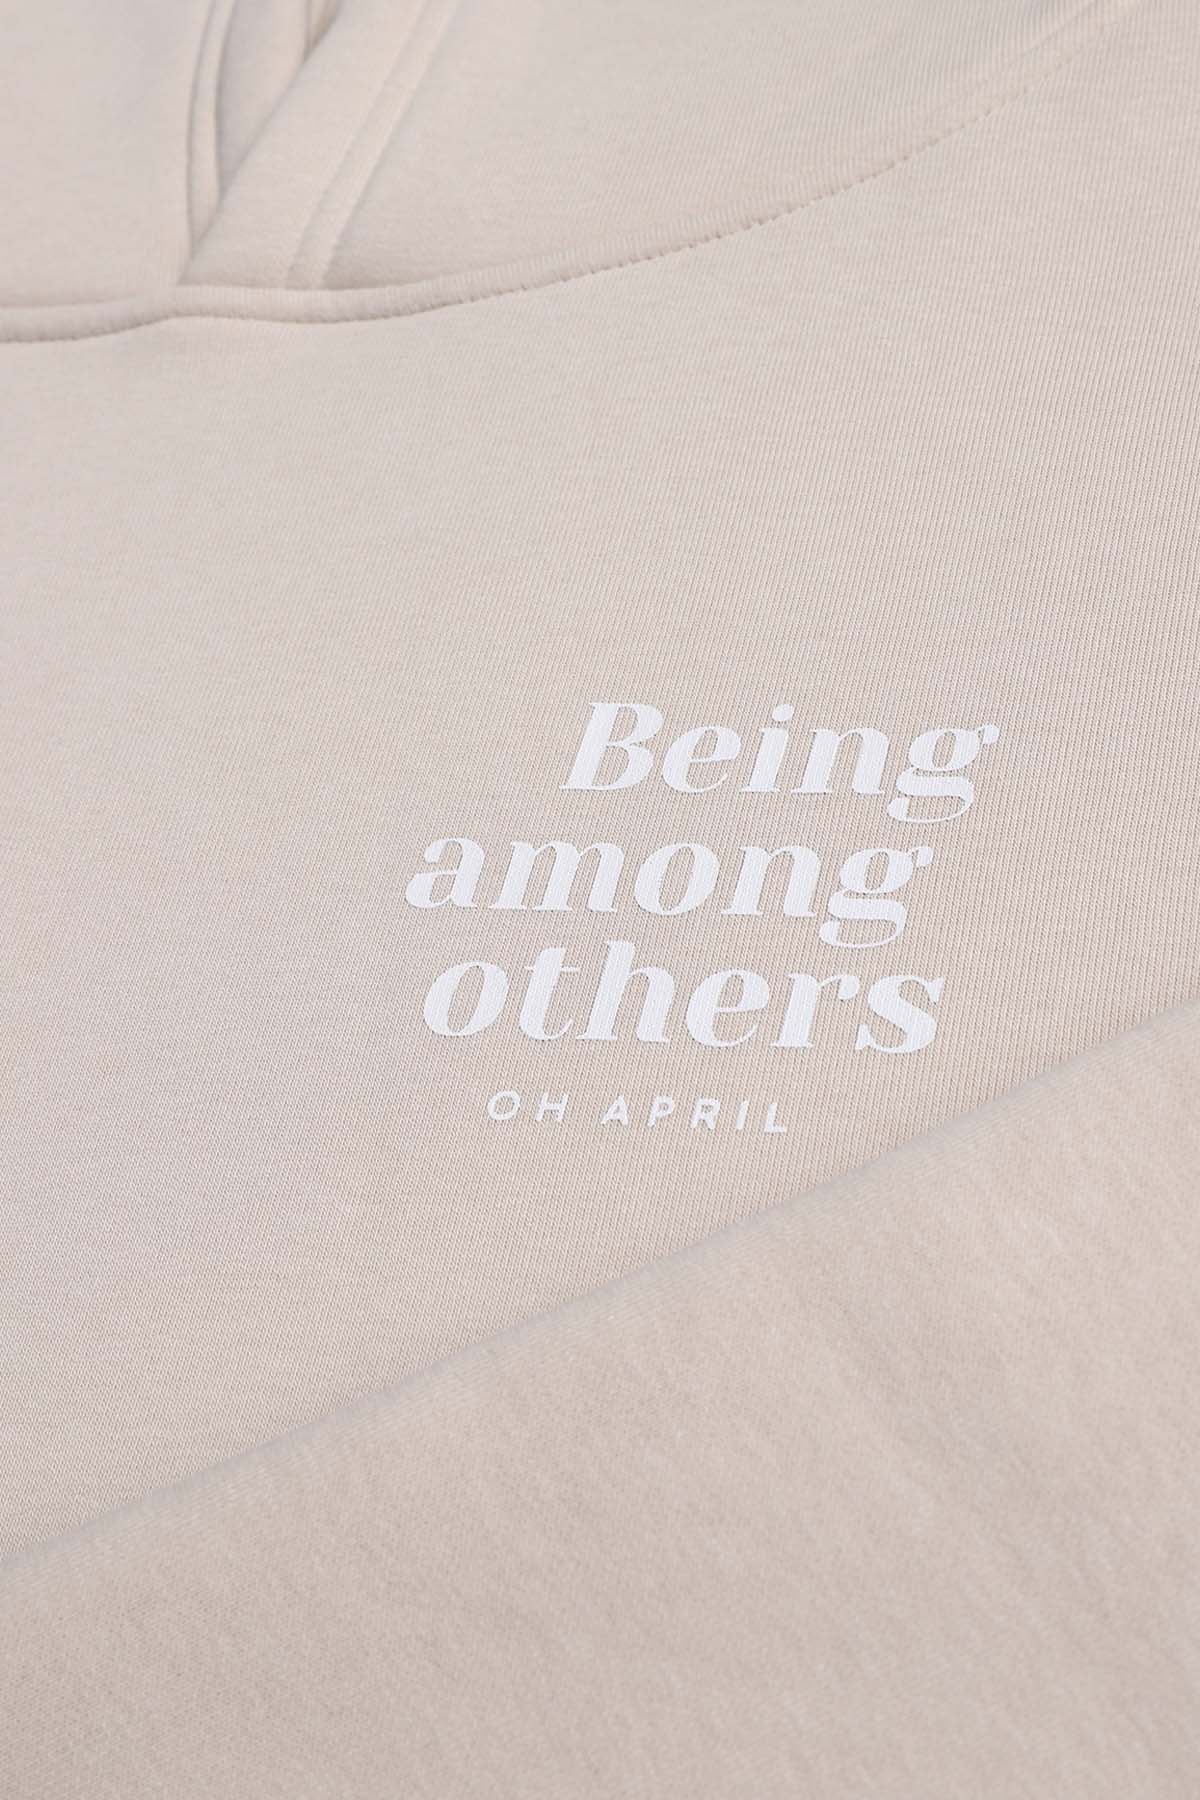 Boyfriend Hoodie "Being Among Others"